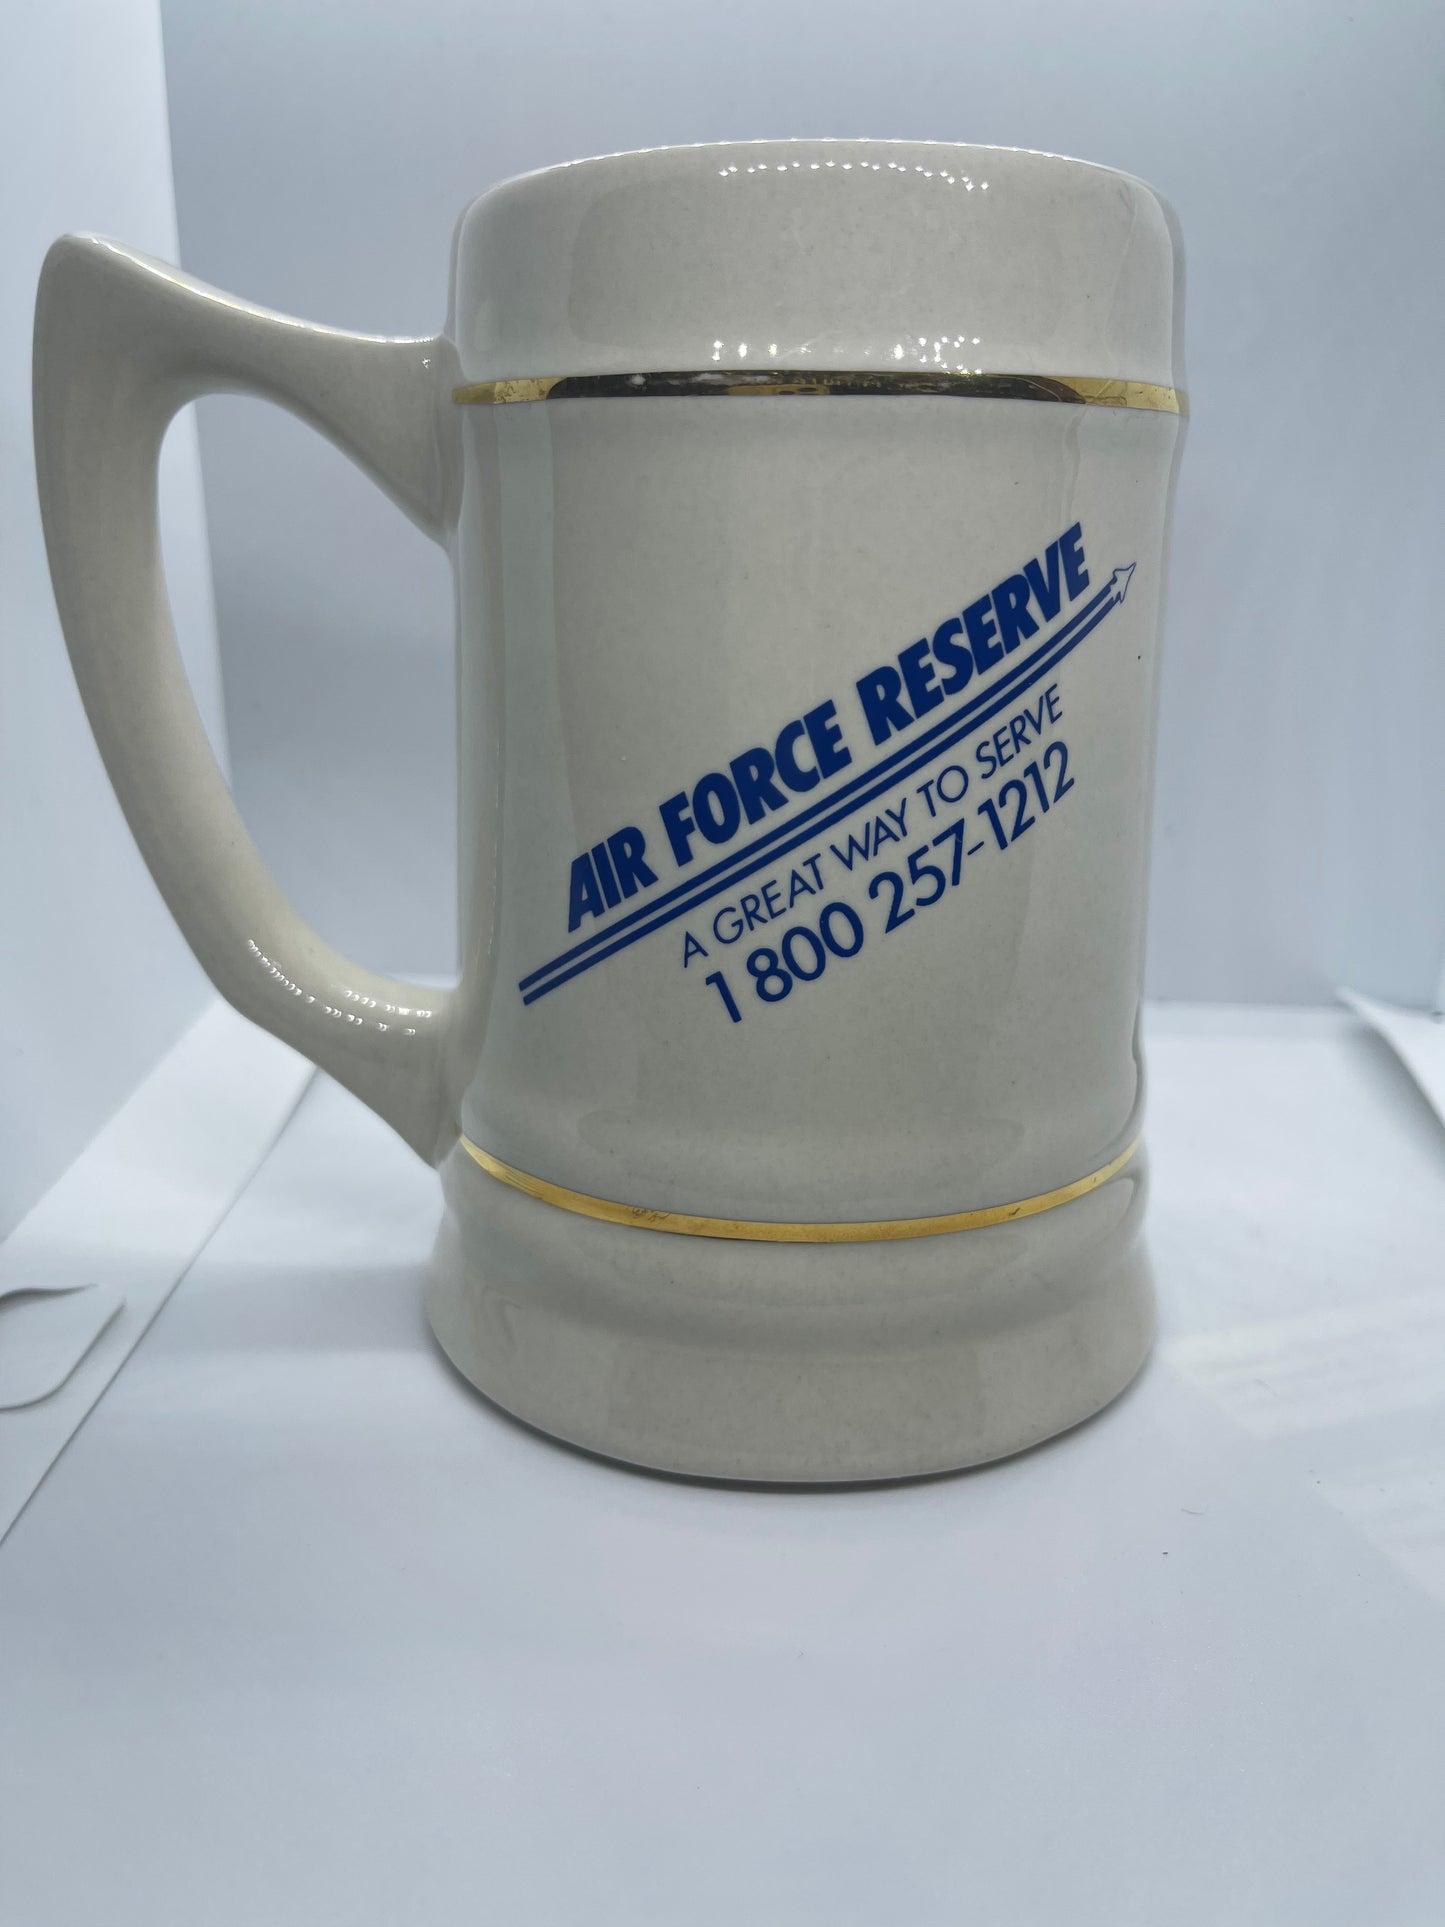 Air Force Reserve "Discover America's Pride" Military Large Coffee Mug